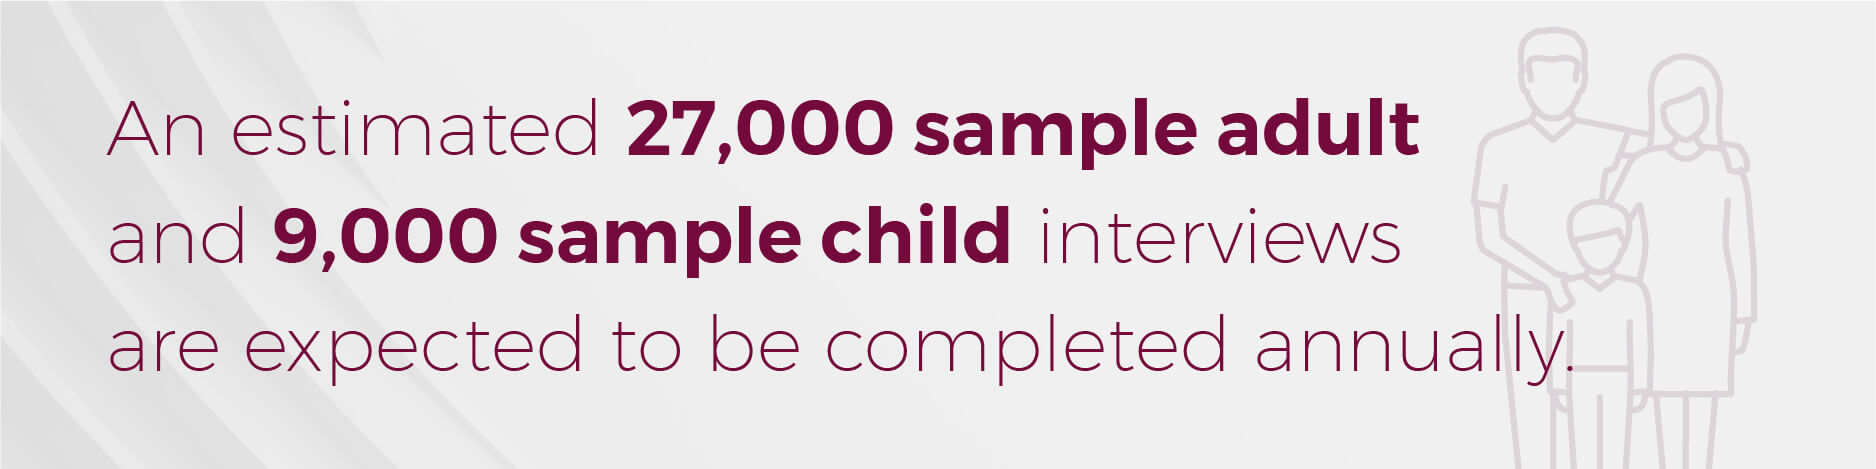 An estimated 27,000 sample adult and 9,000 sample child interviews are expected to be completed annually!